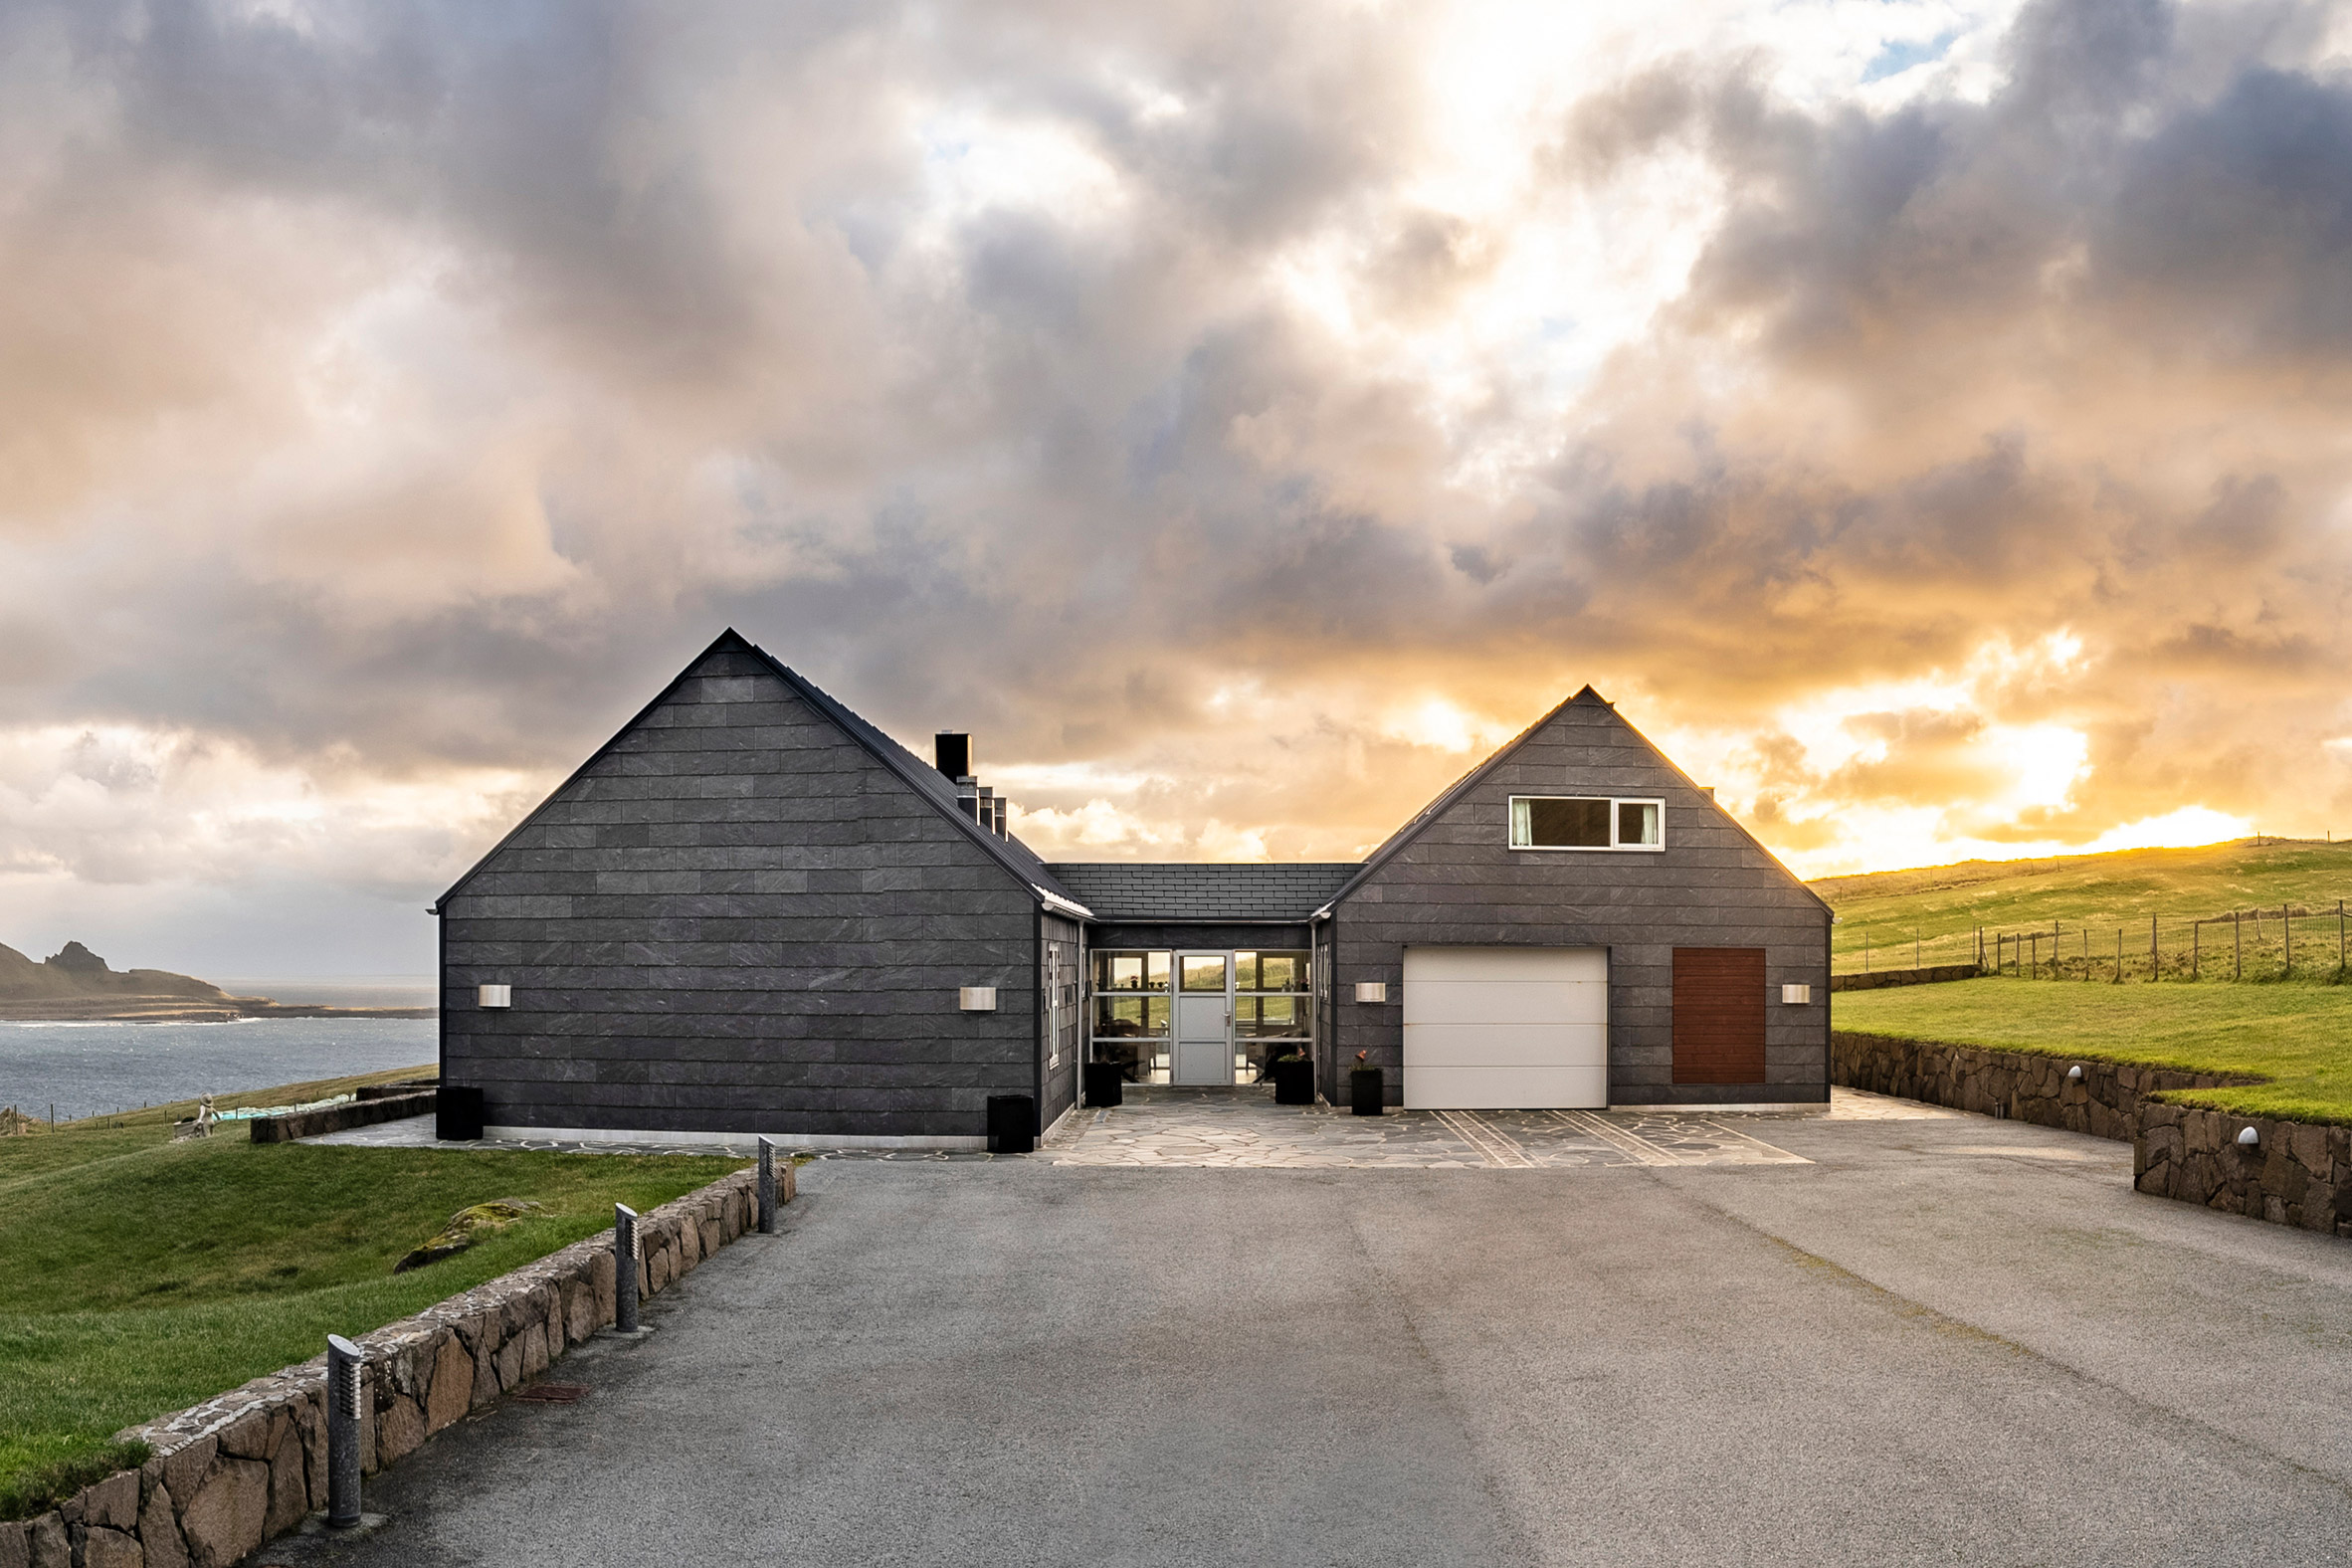 A home made up of two pitched buildings covered in slate cladding with a paved driveway in front